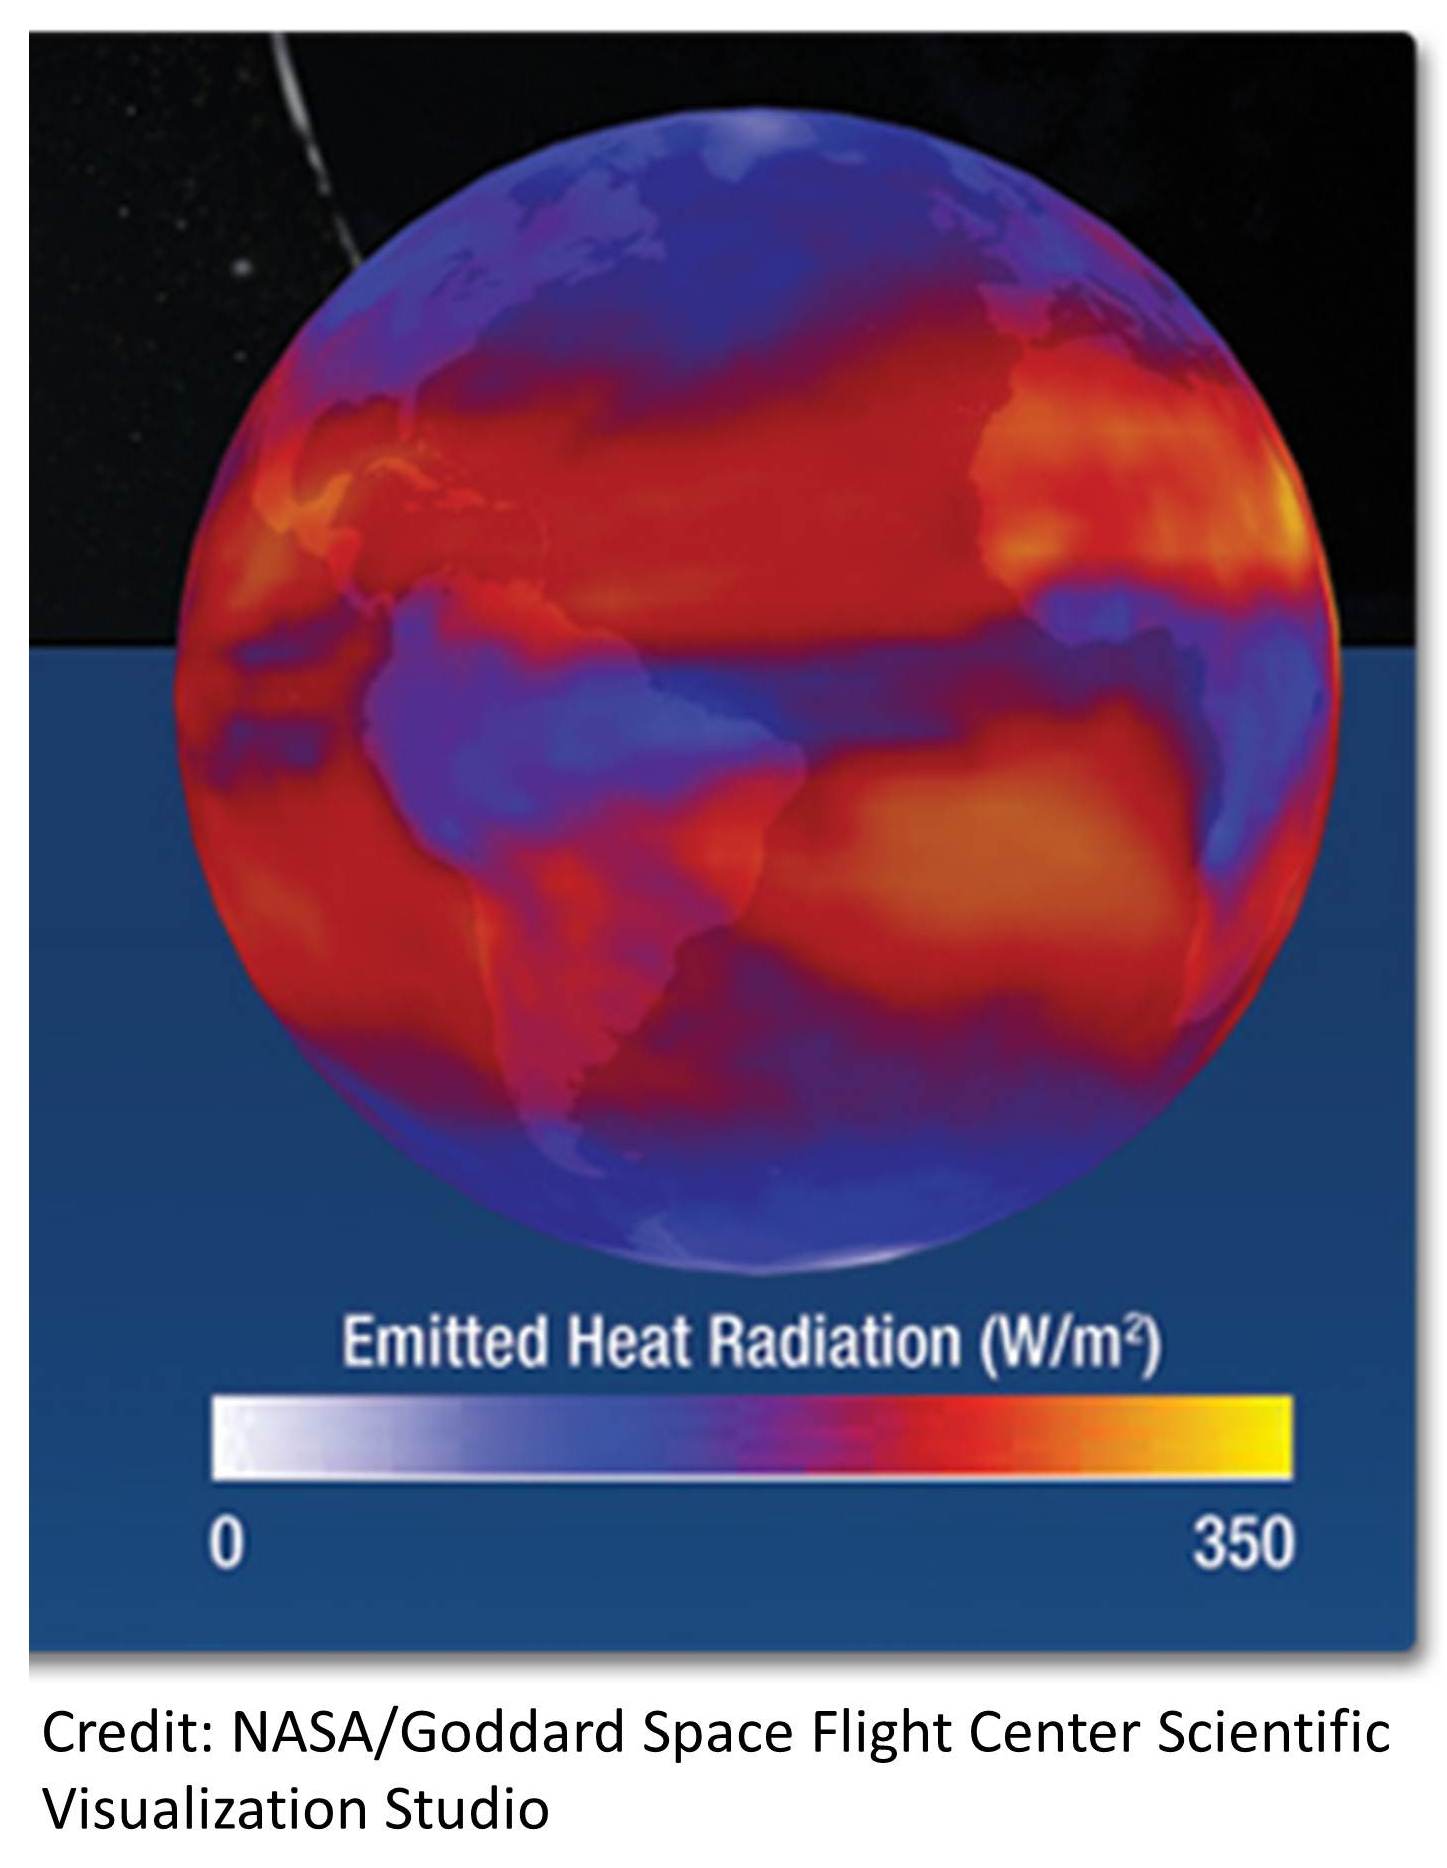 An image from NASA that illustrates the amount of terrestrial heat dissipated by Earth into the outer space